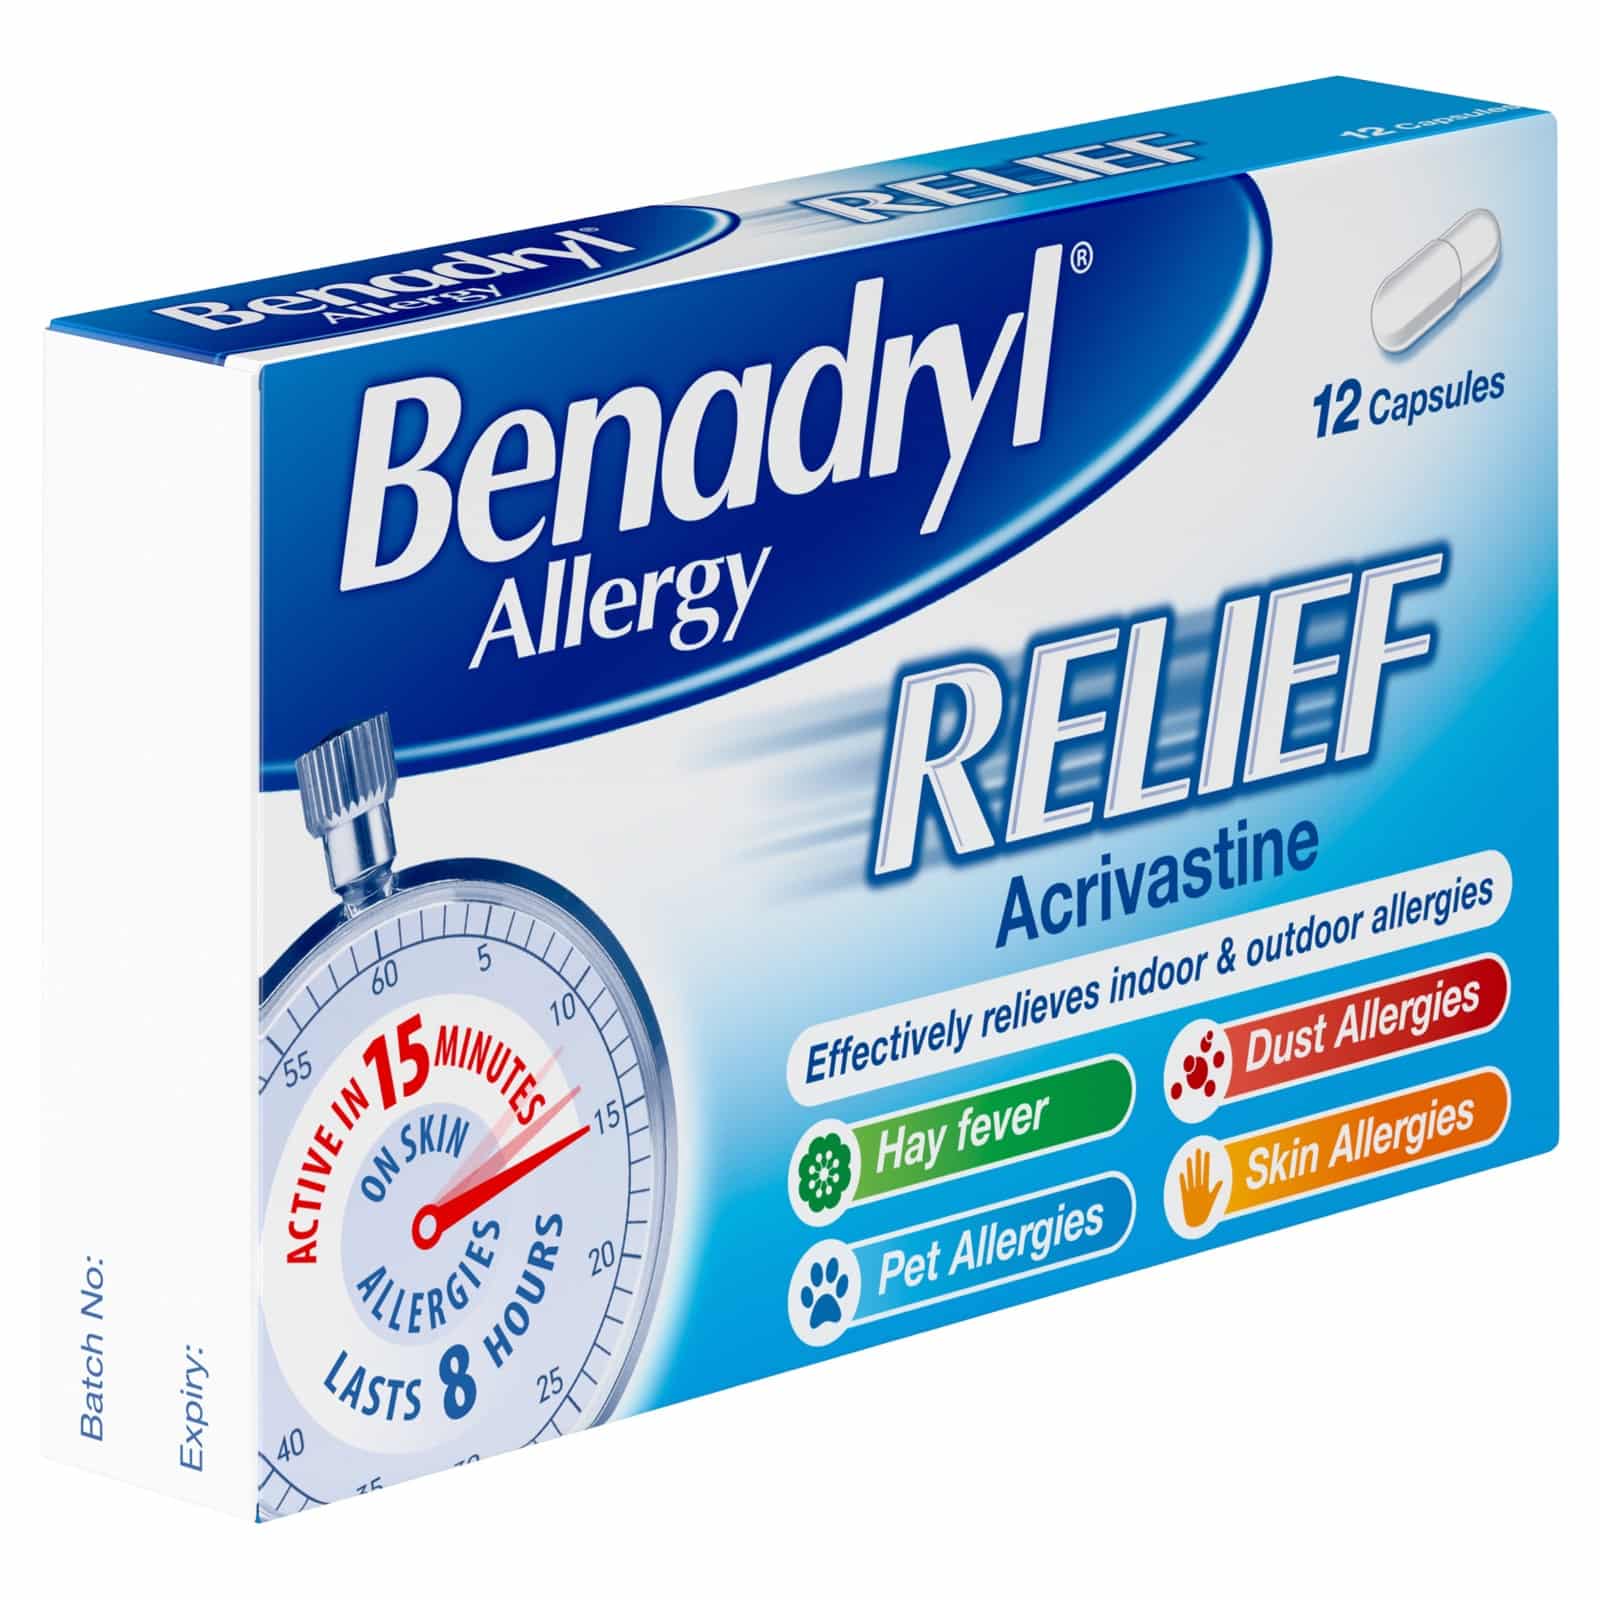 Benadryl Allergy Relief Capsules For Symptoms Of Hay Fever &  Other ...